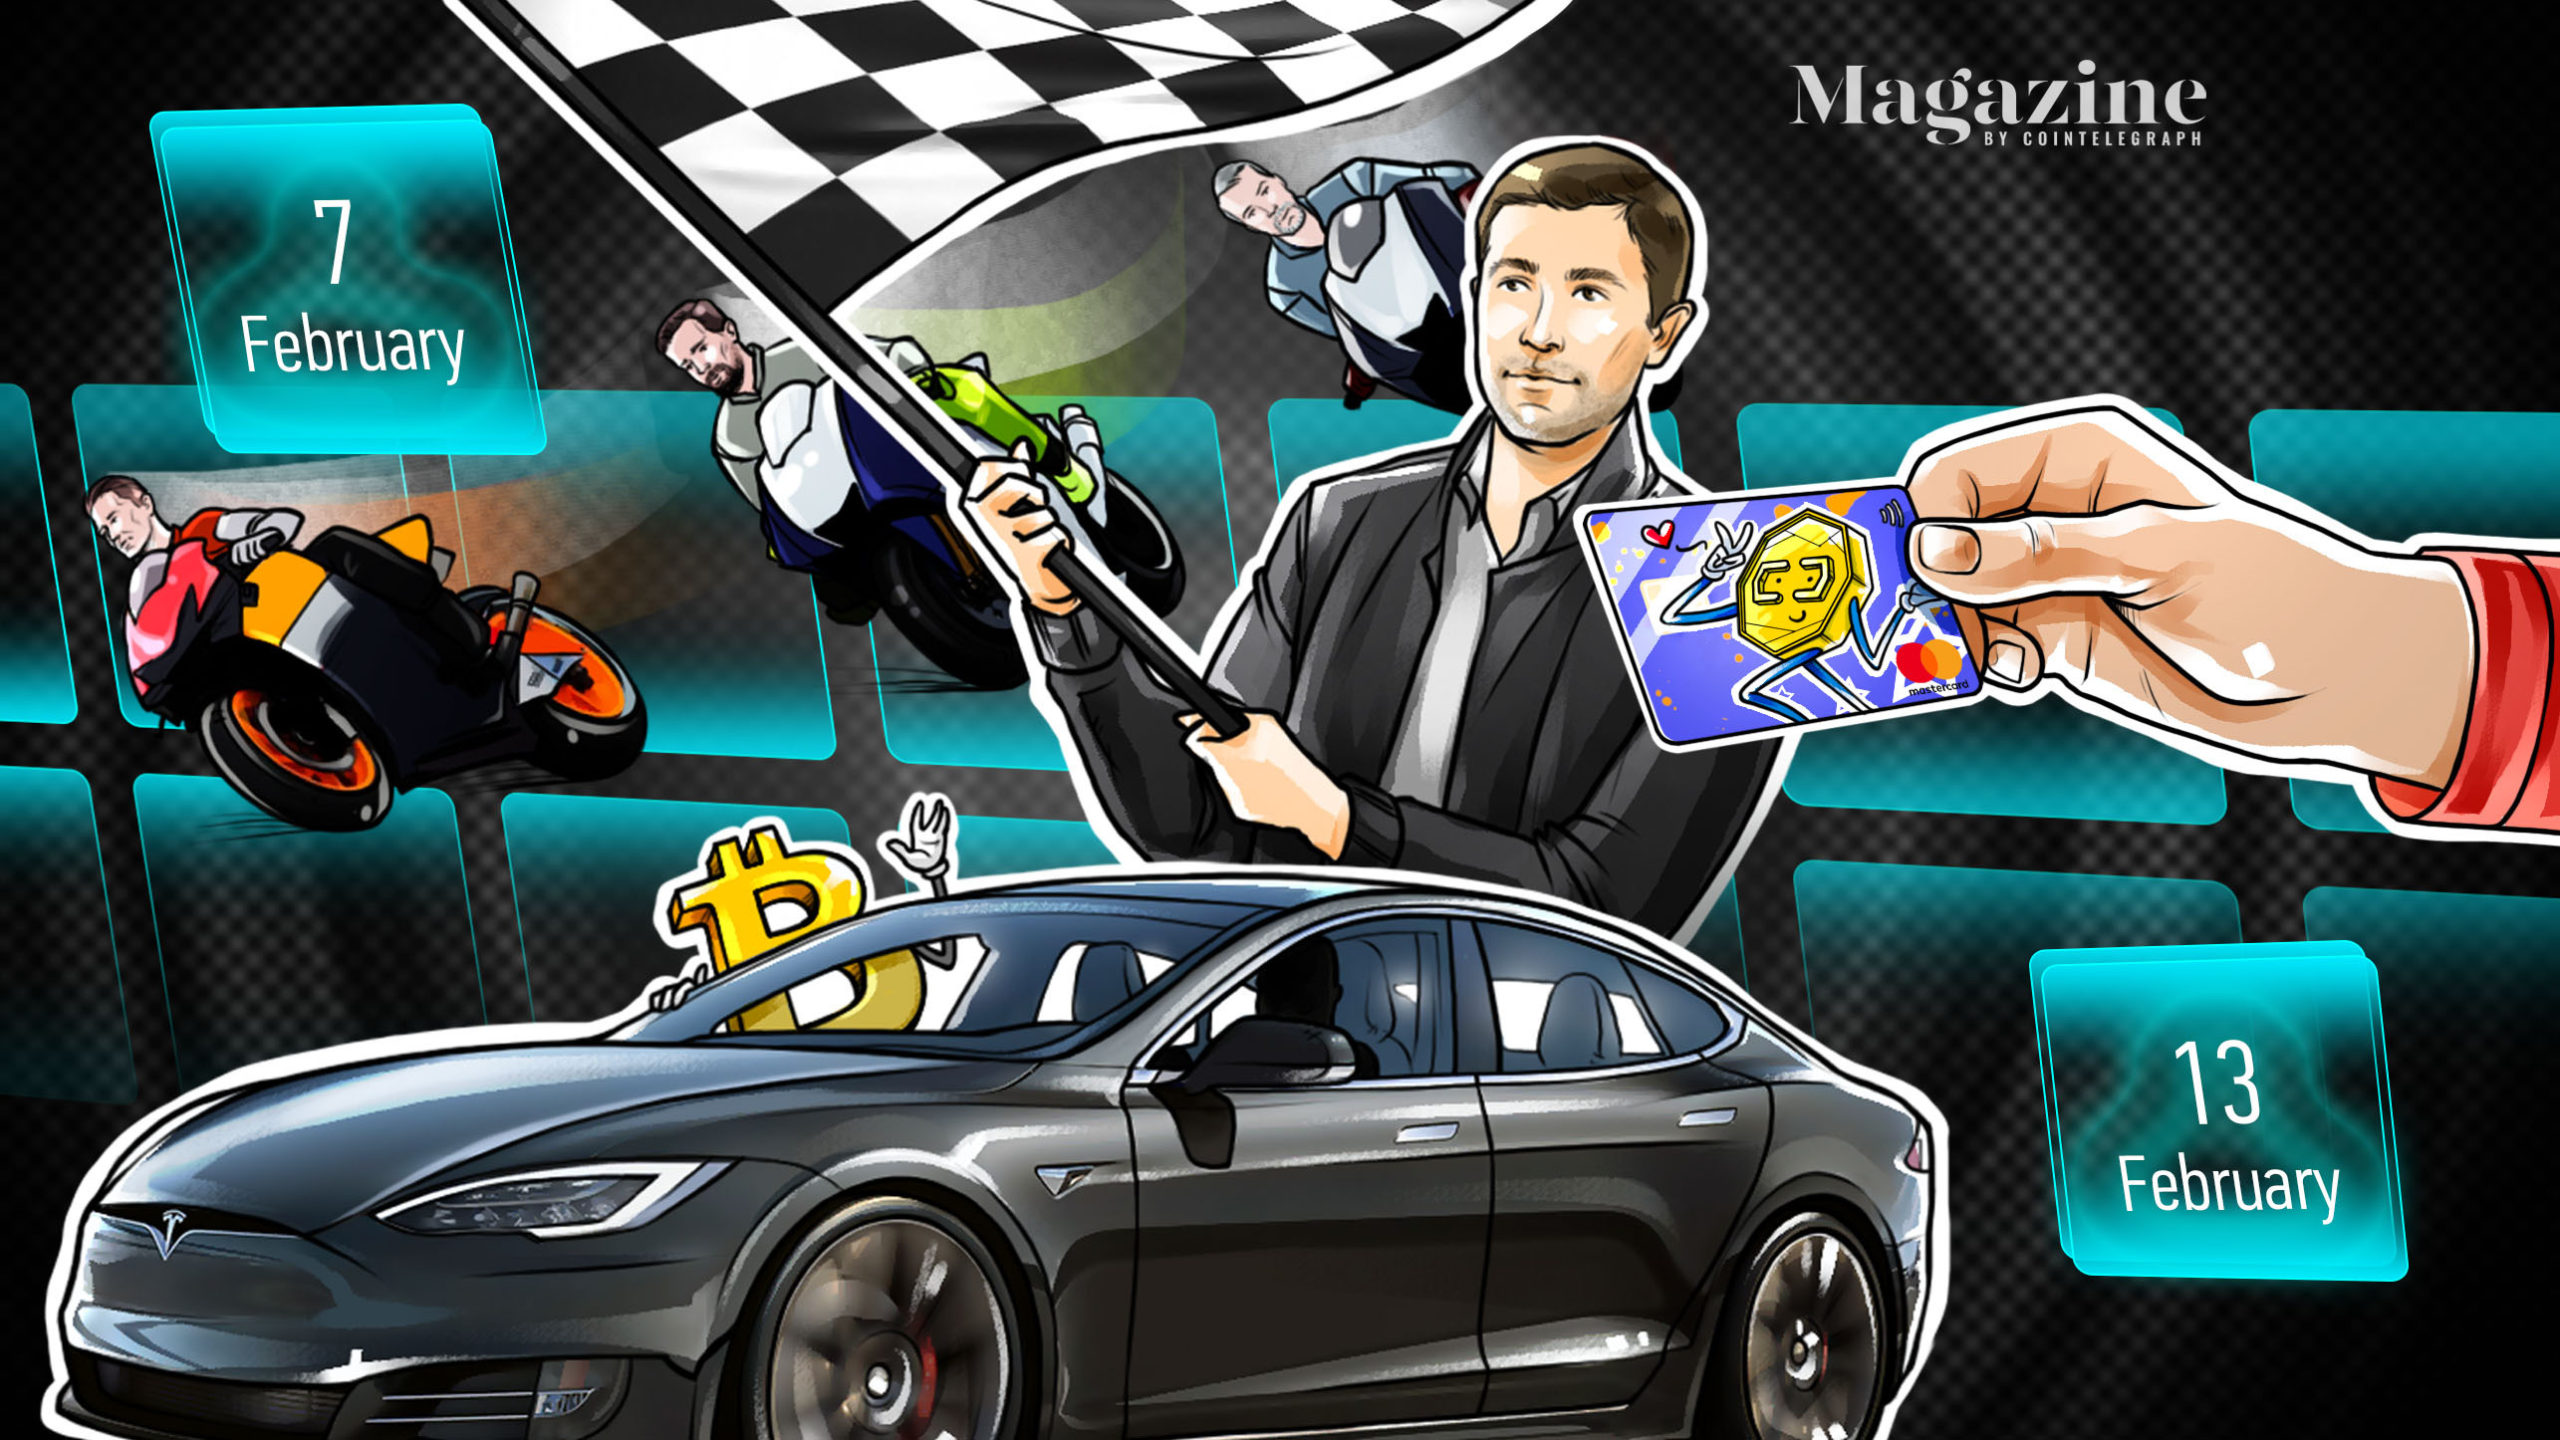 Tesla buys BTC, Mastercard supports crypto, DOGE founder speaks out: Hodler’s Digest, Feb. 7–13